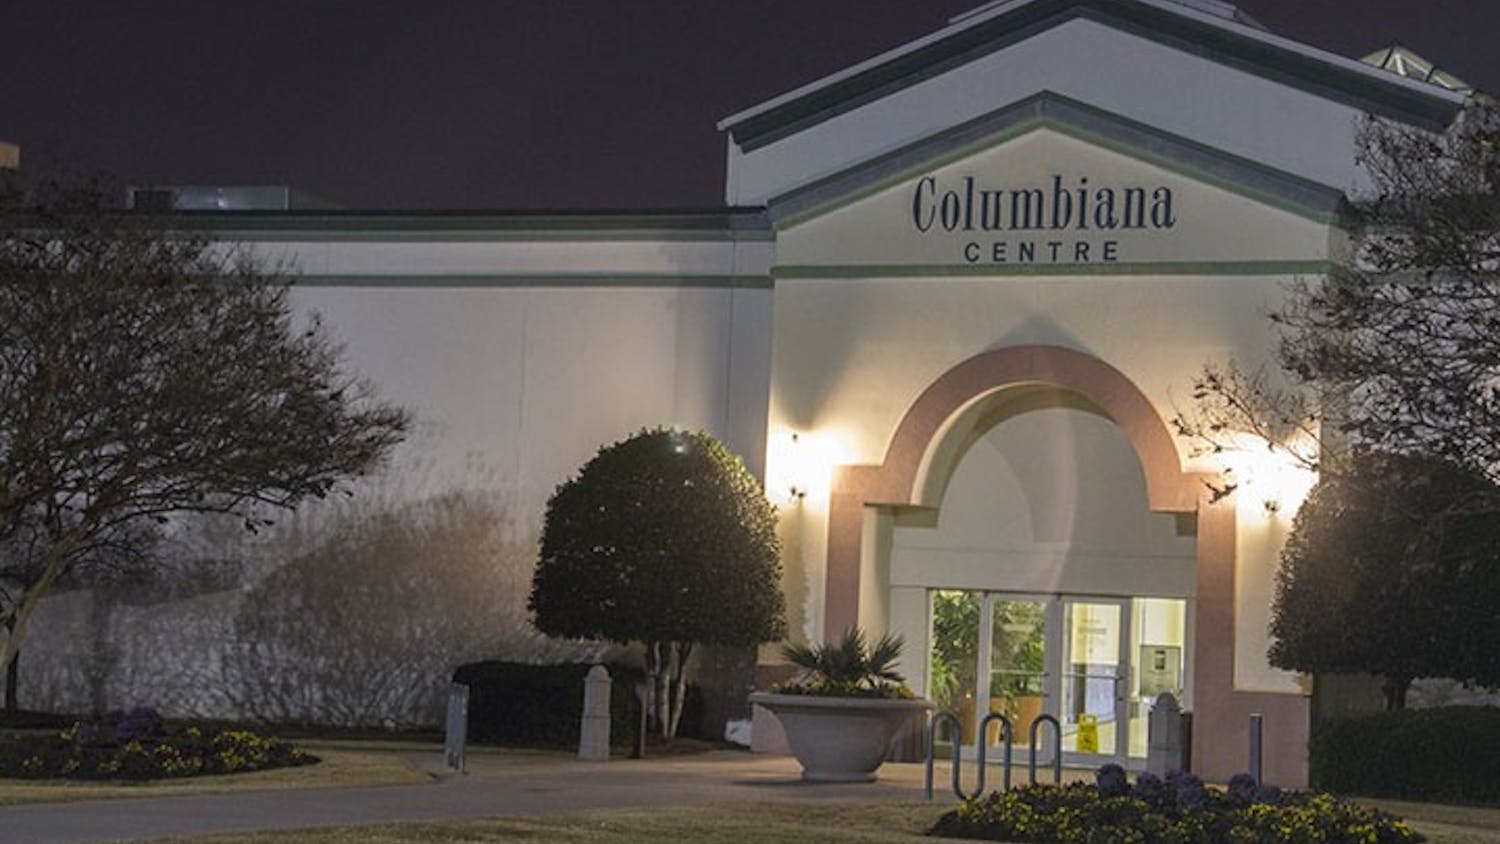 Columbia police are still investigating whether or not shots were actually fired at Columbiana Centre Saturday night.